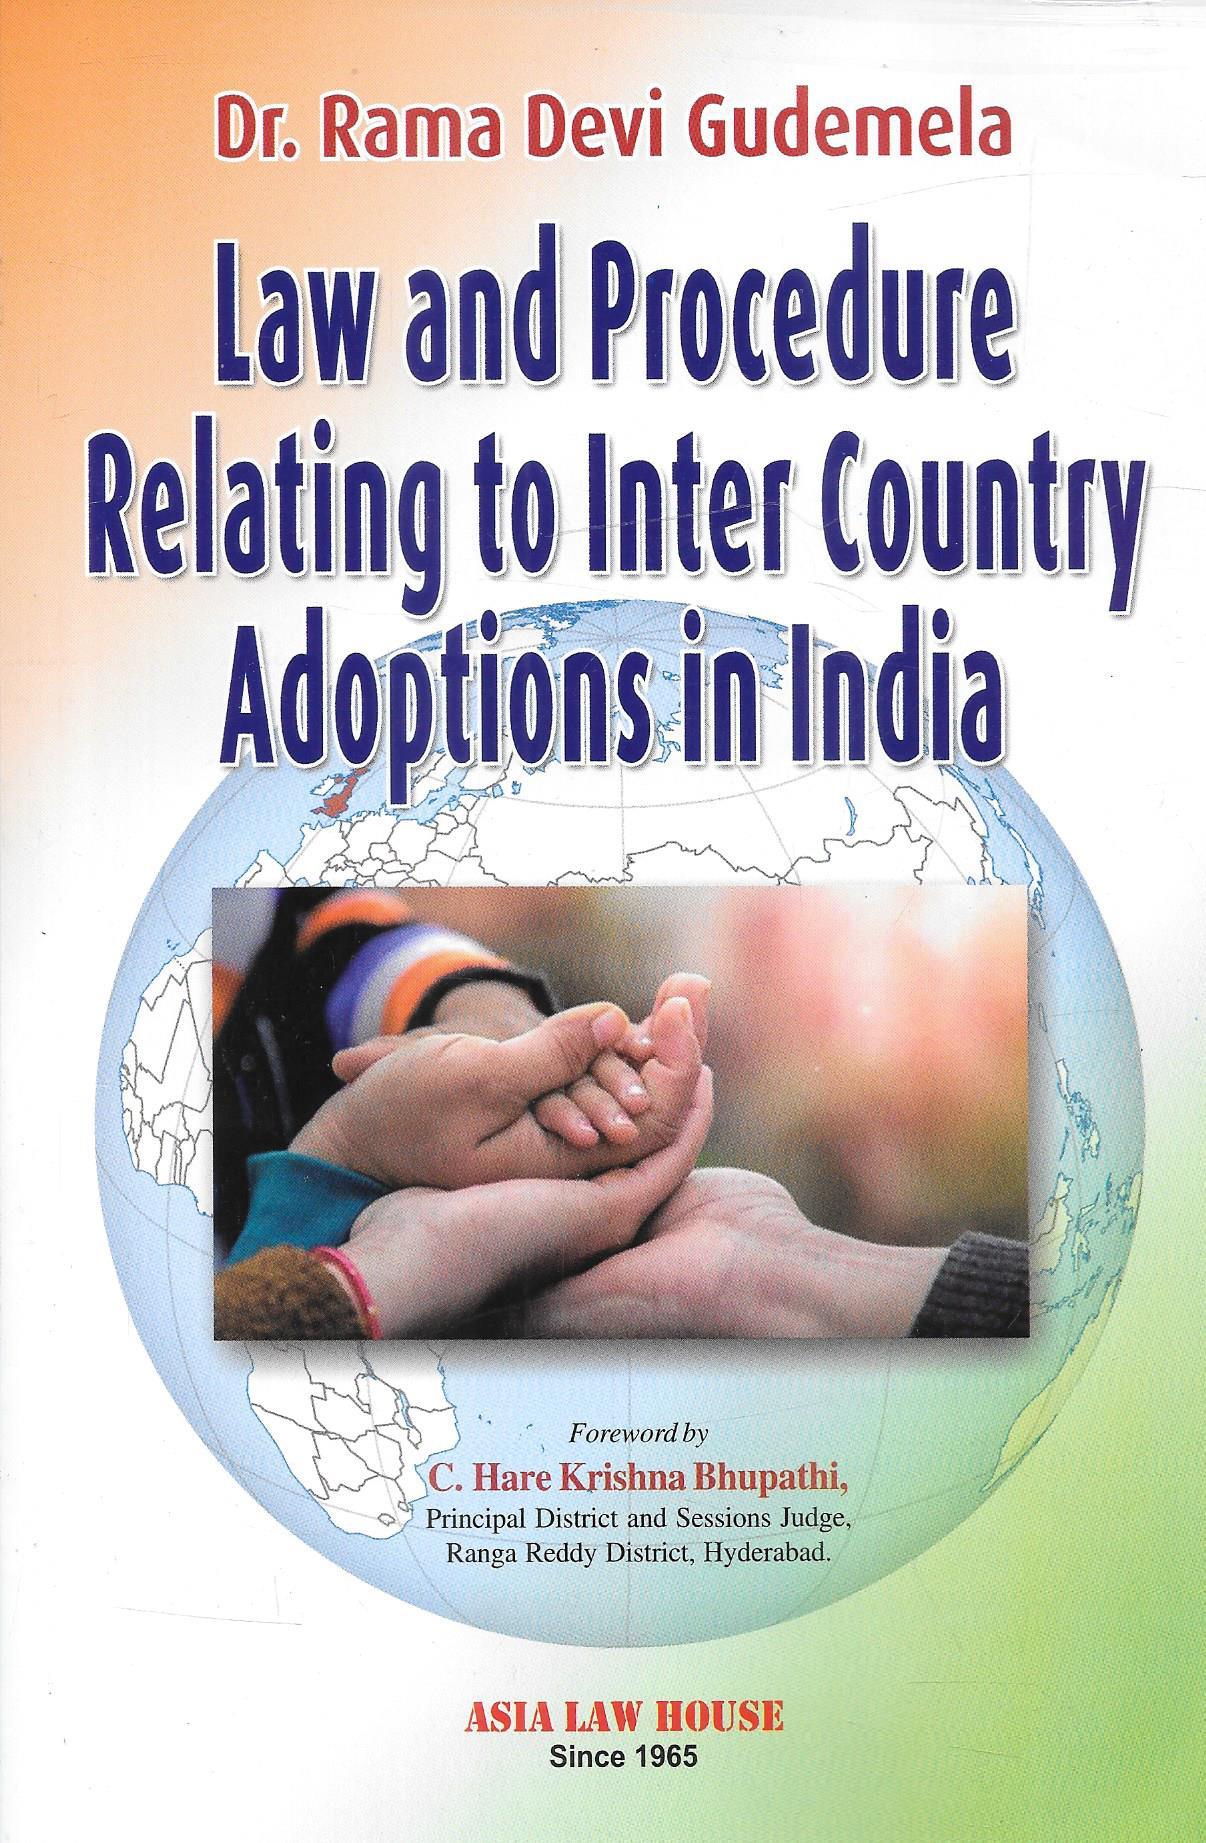 Law and Procedure relating to Inter Country Adoptions in India